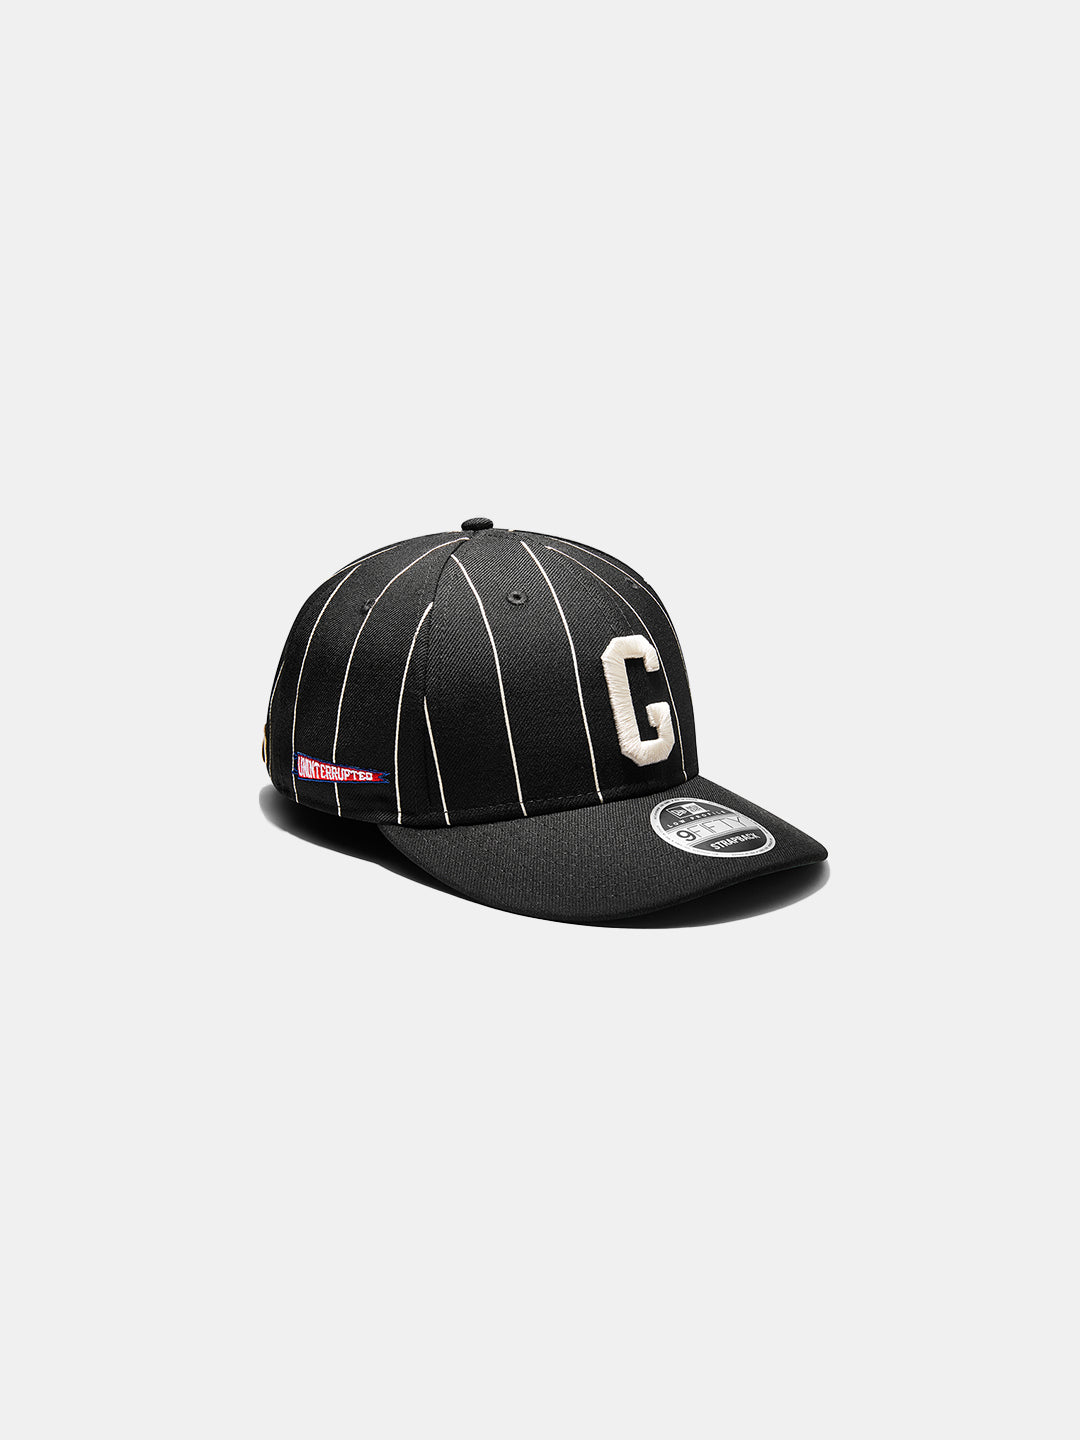 Homestead Grays X UNINTERRUPTED Low Profile 9FIFTY - Black and white striped hat